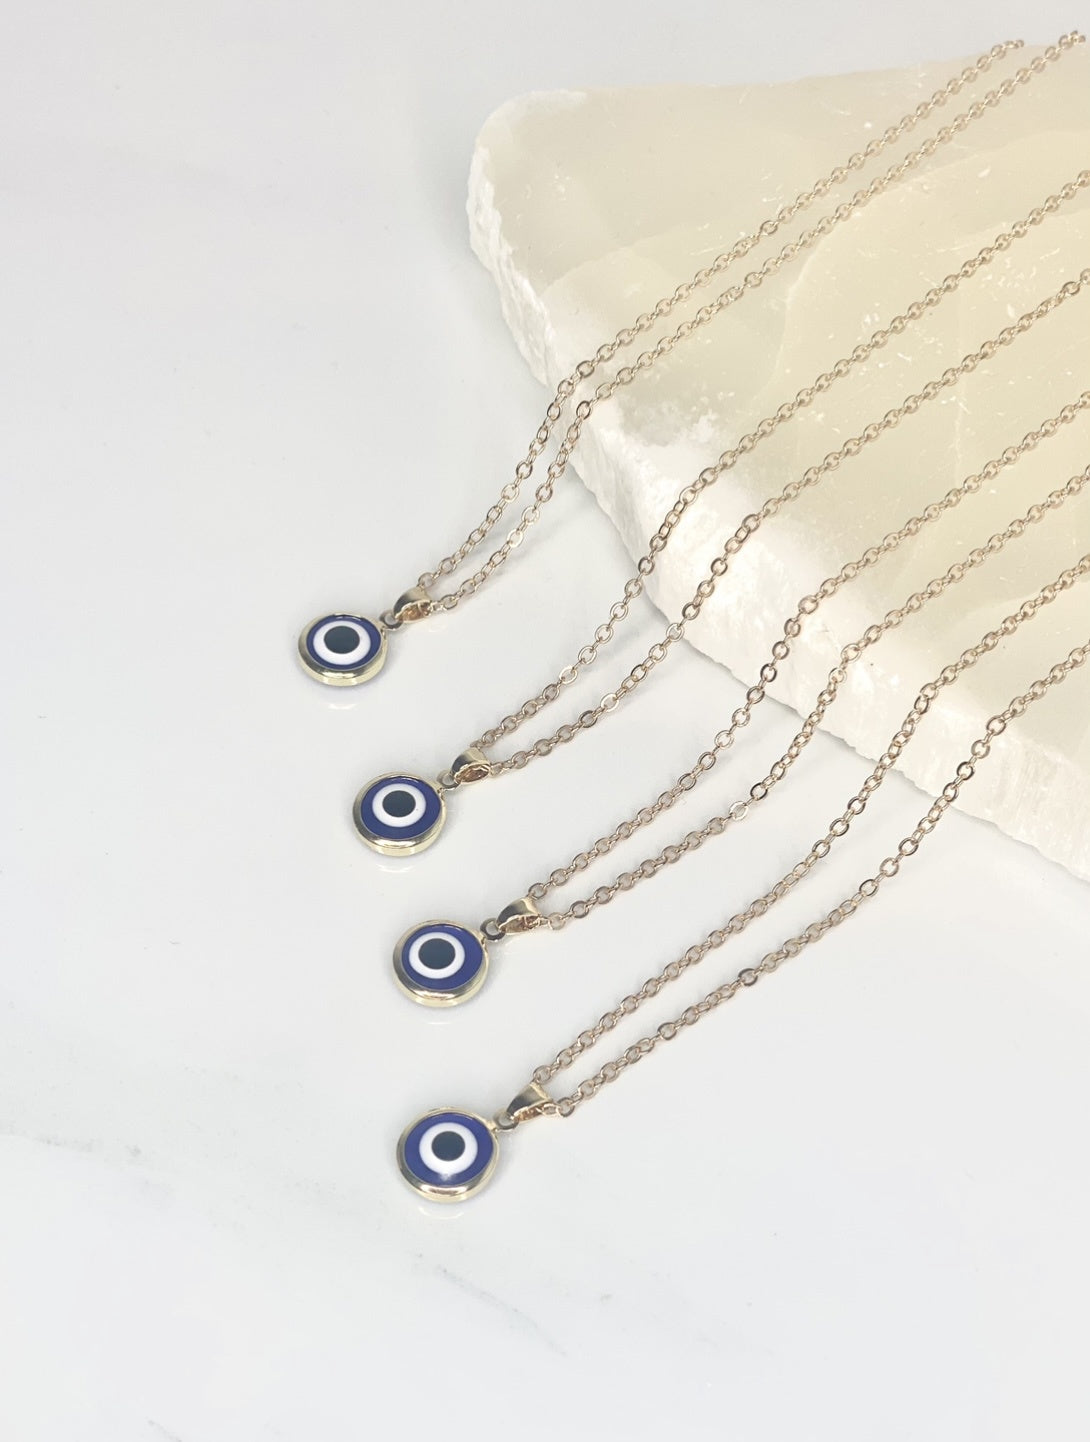 Blue Eye of Protection Necklace - Dark Blue